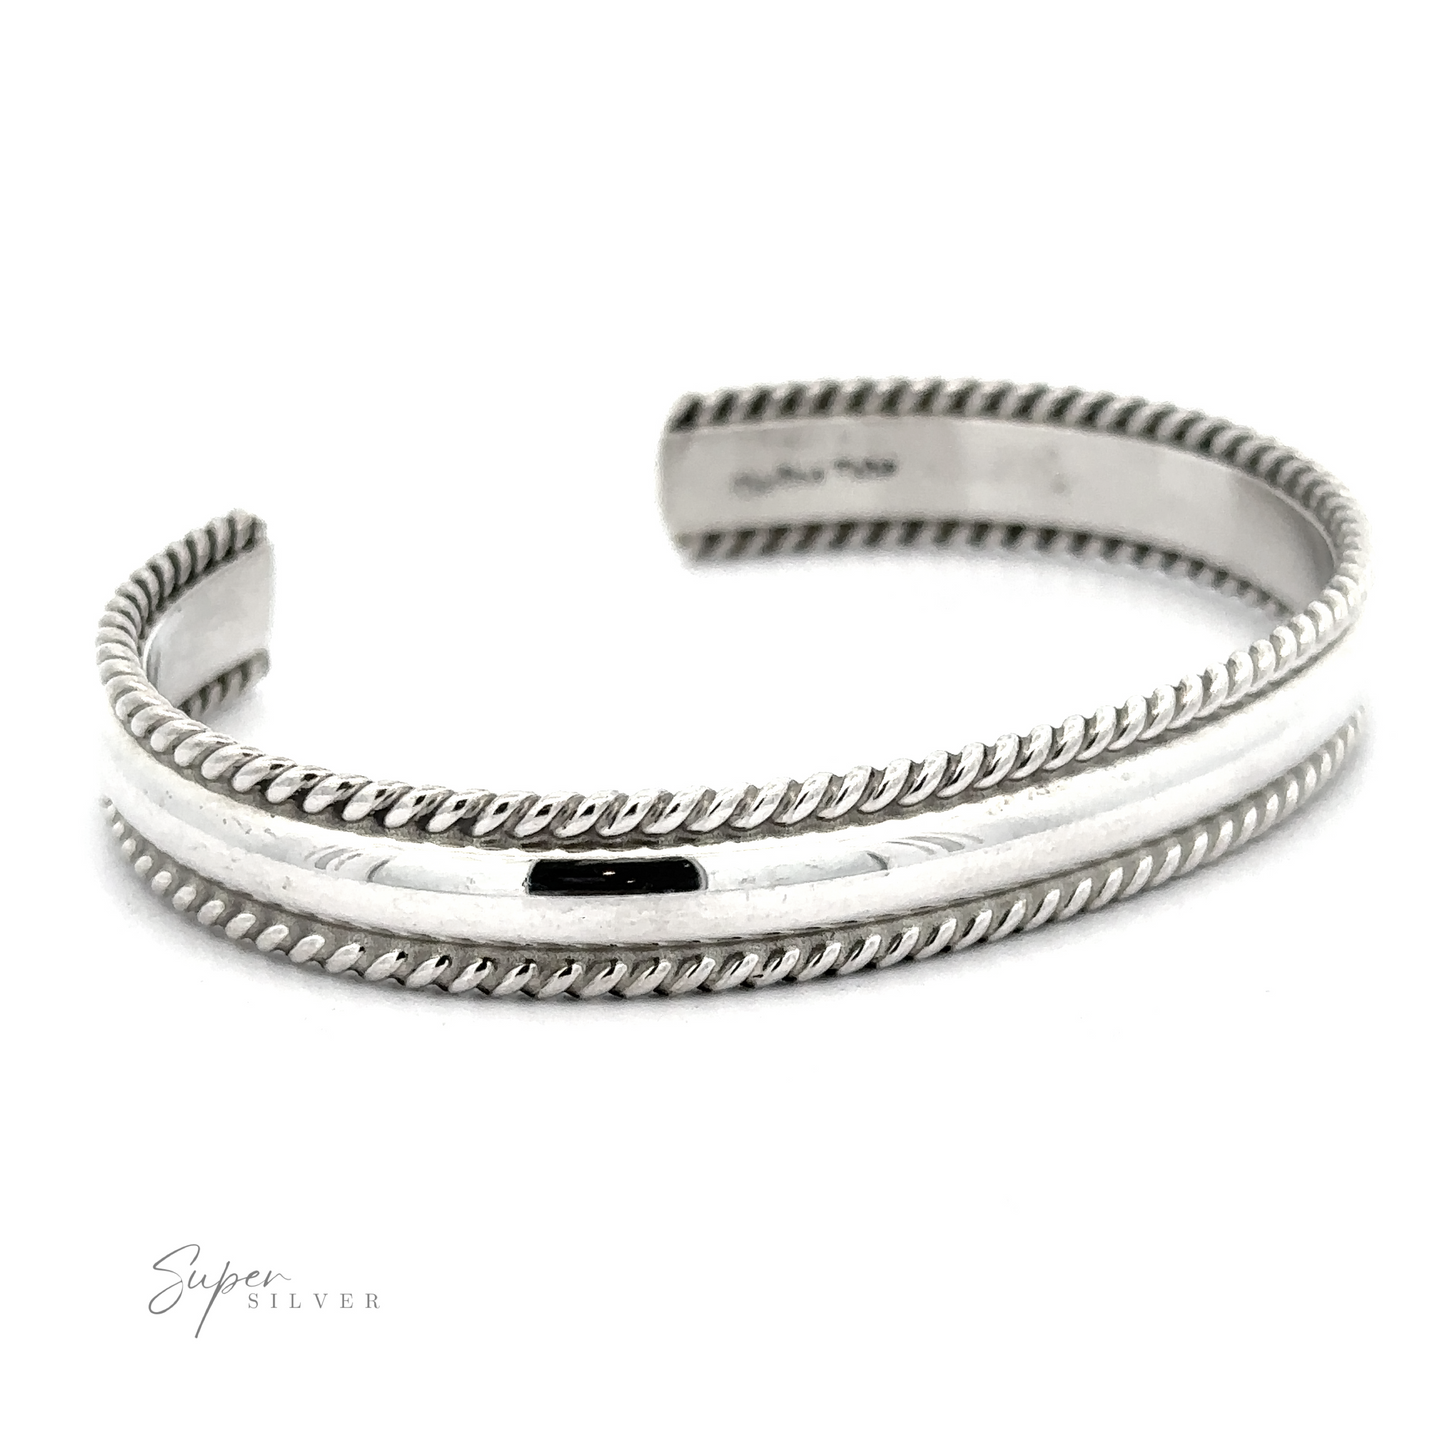 A polished Native American Handmade Silver Rope Cuff with twisted, rope-like edges on both sides, featuring the branding "Super Silver" on the bottom left. This exquisite statement piece seamlessly blends classic elegance with contemporary flair.